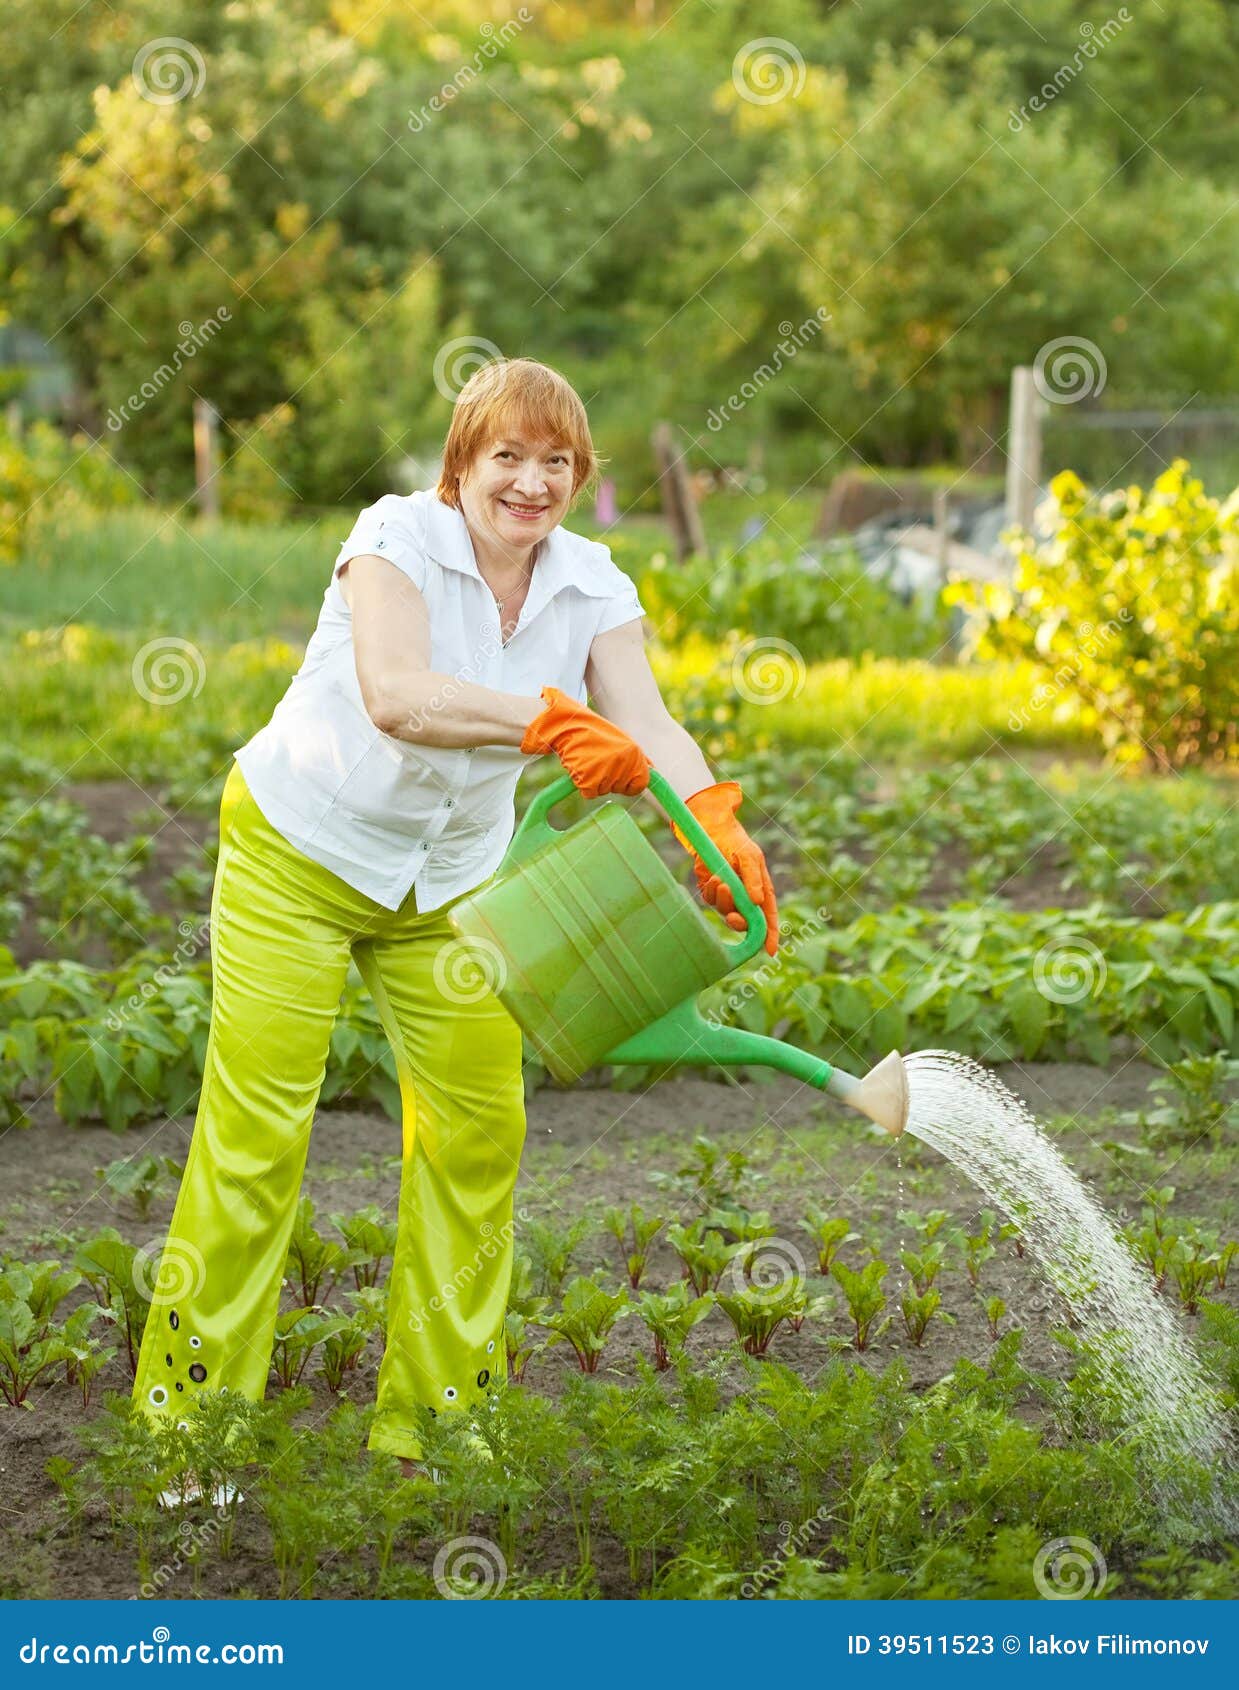 Mature Woman Watering Plant Stock Image - Image of activity, person ...